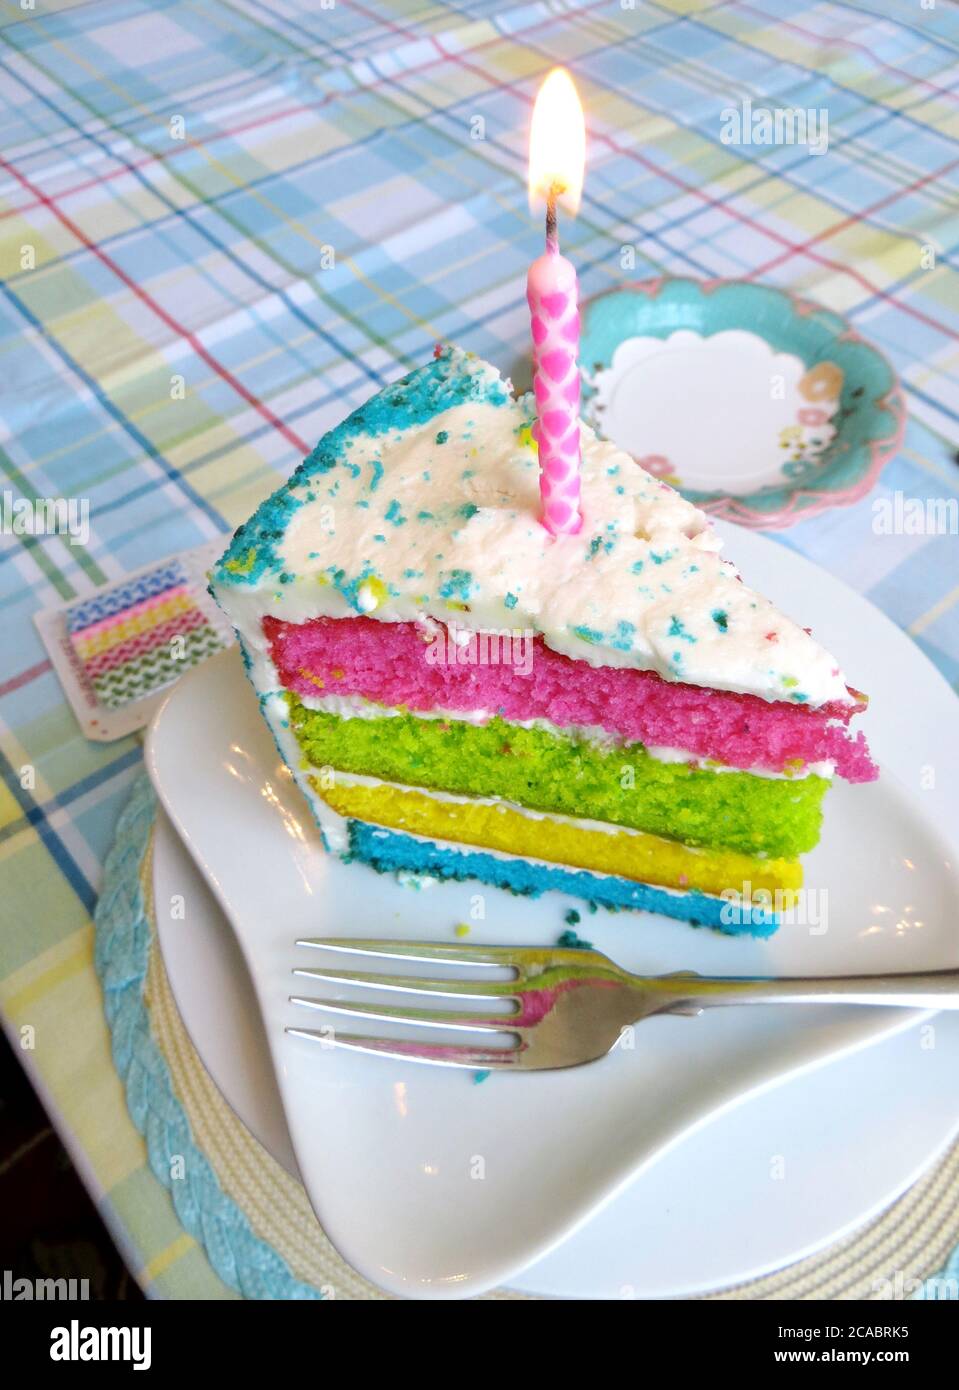 A slice of cake with white frosting and a candle Stock Photo